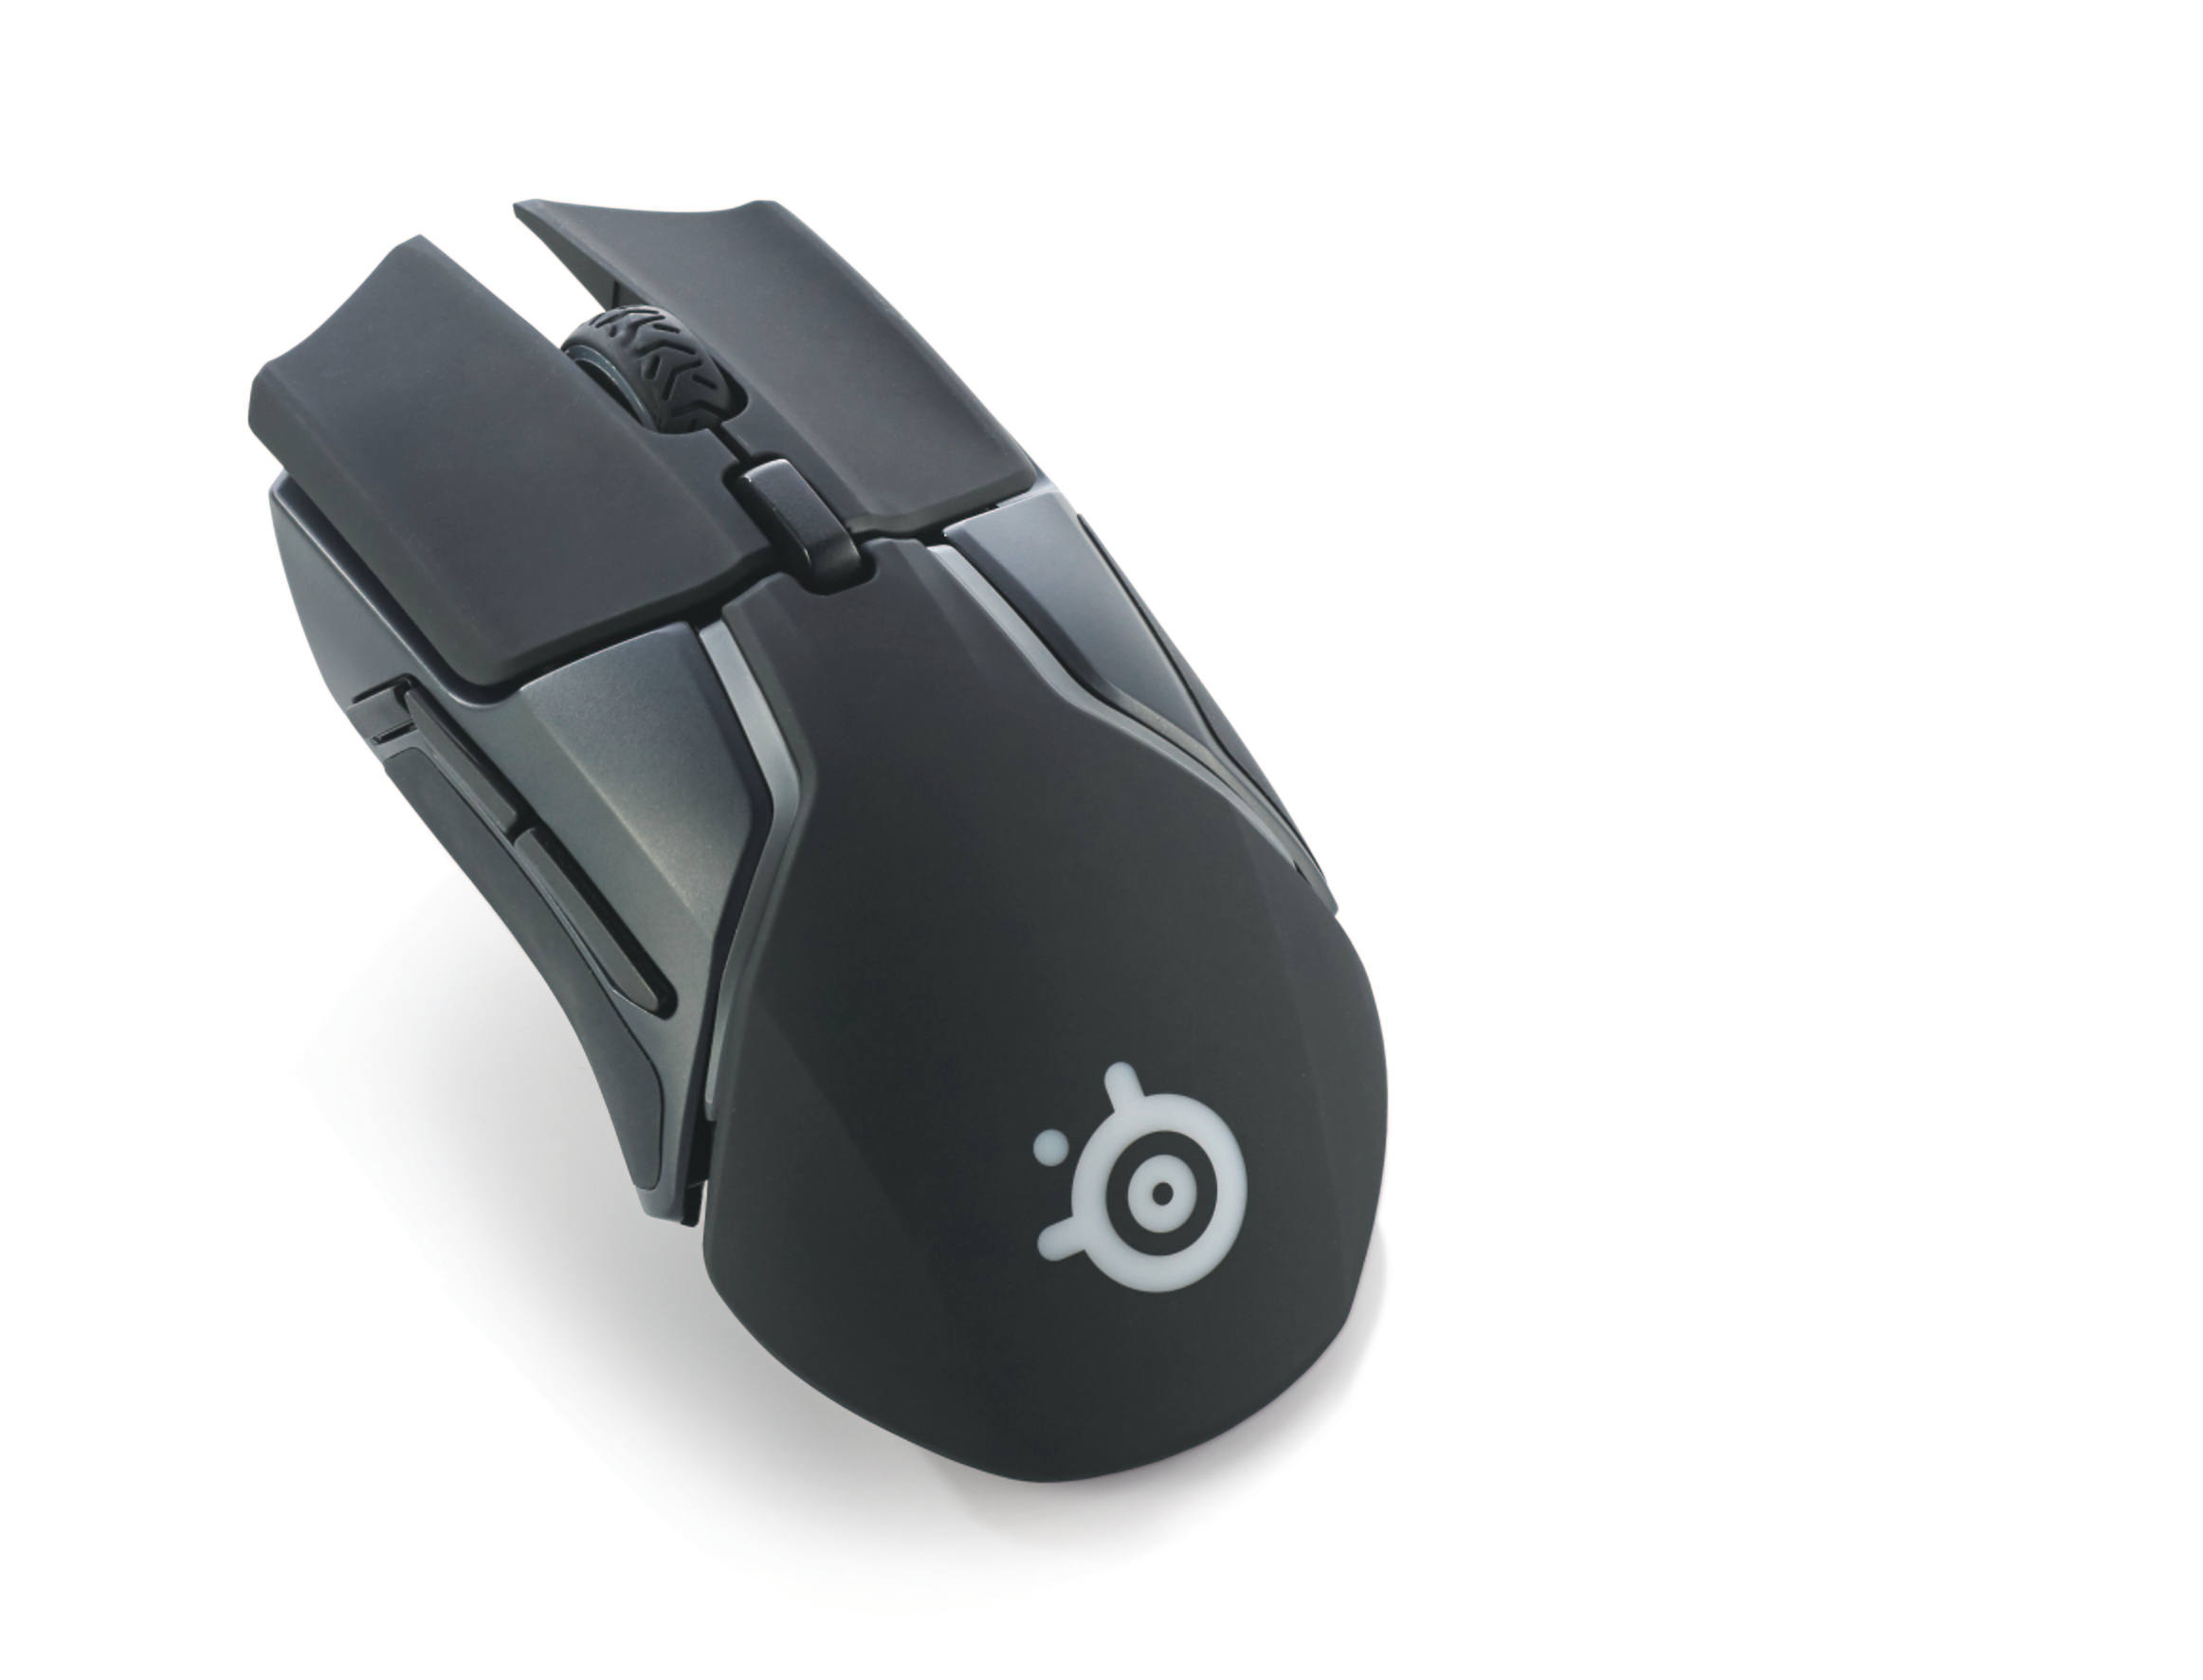 Vulgarity format quiet SteelSeries Rival 600 mouse review | PC Gamer